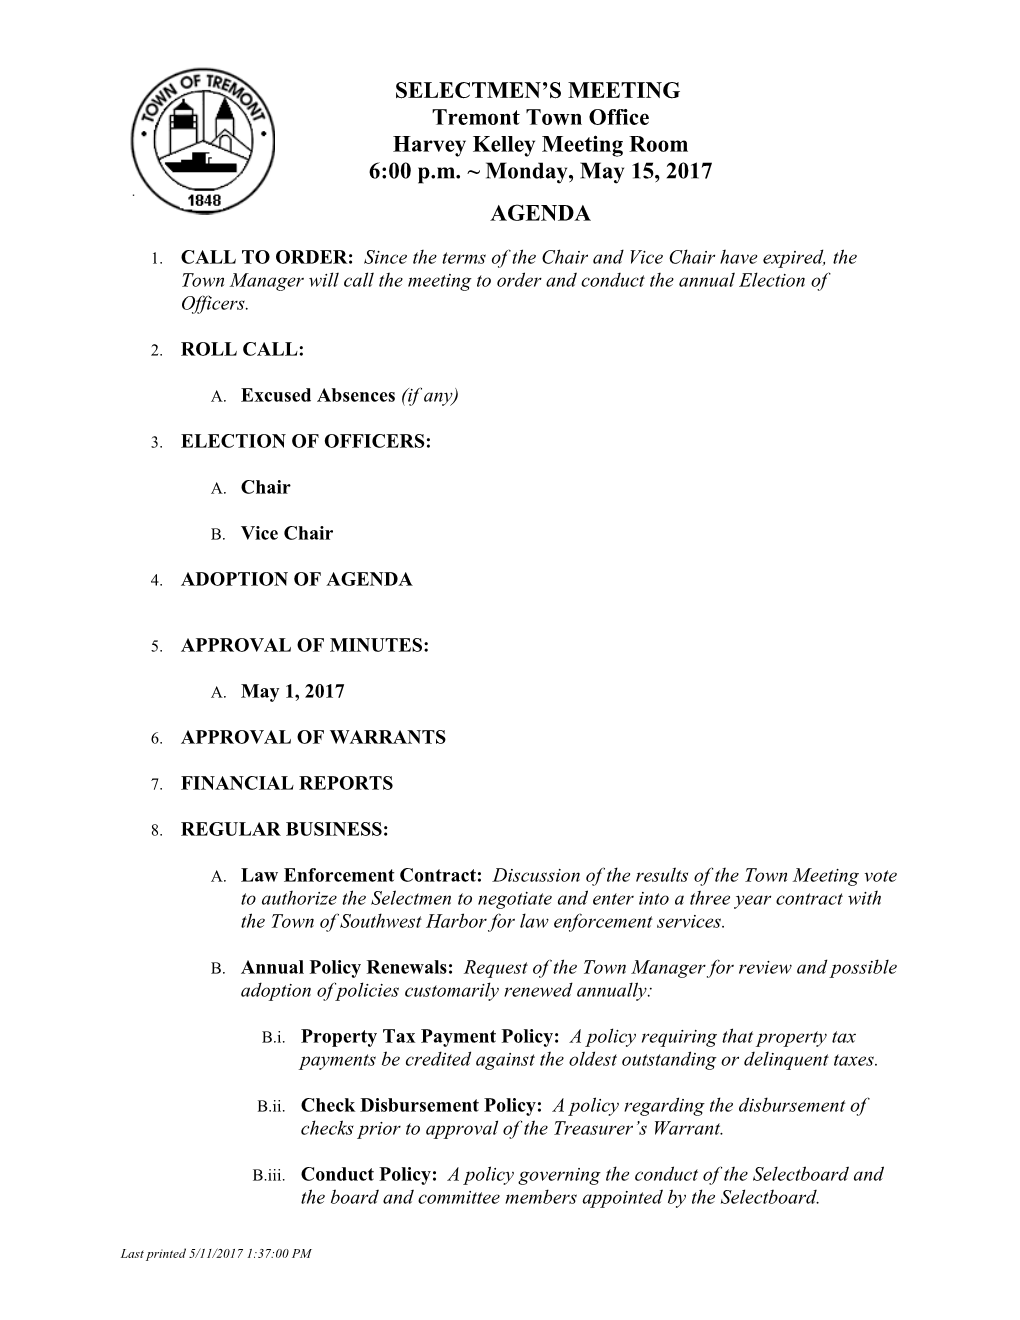 Agenda Tremont Board of Selectmen May 15, 2017Page 1 of 2